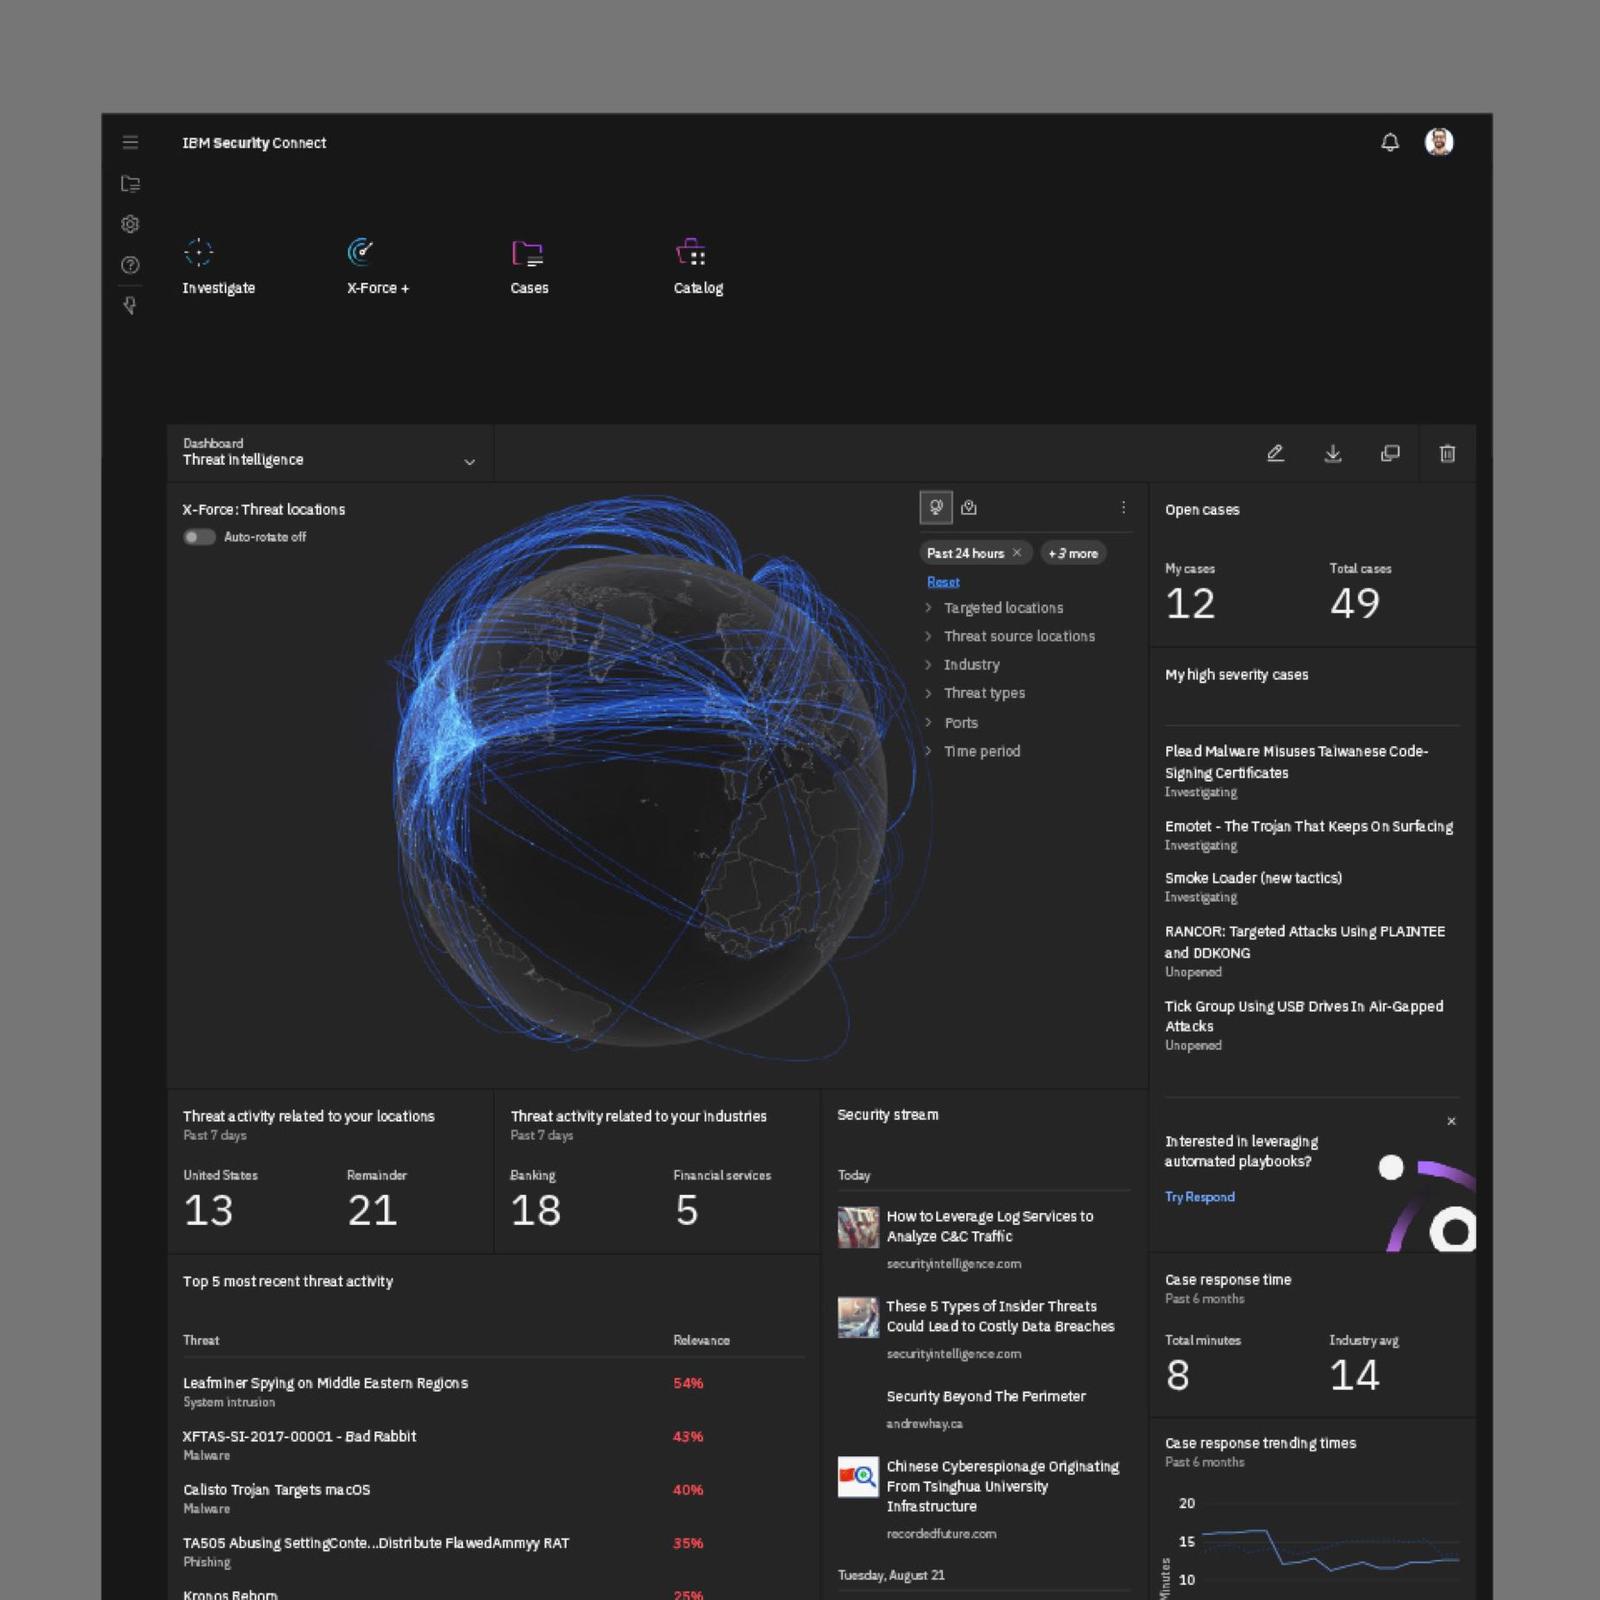 IBM Security Connect dashboard.